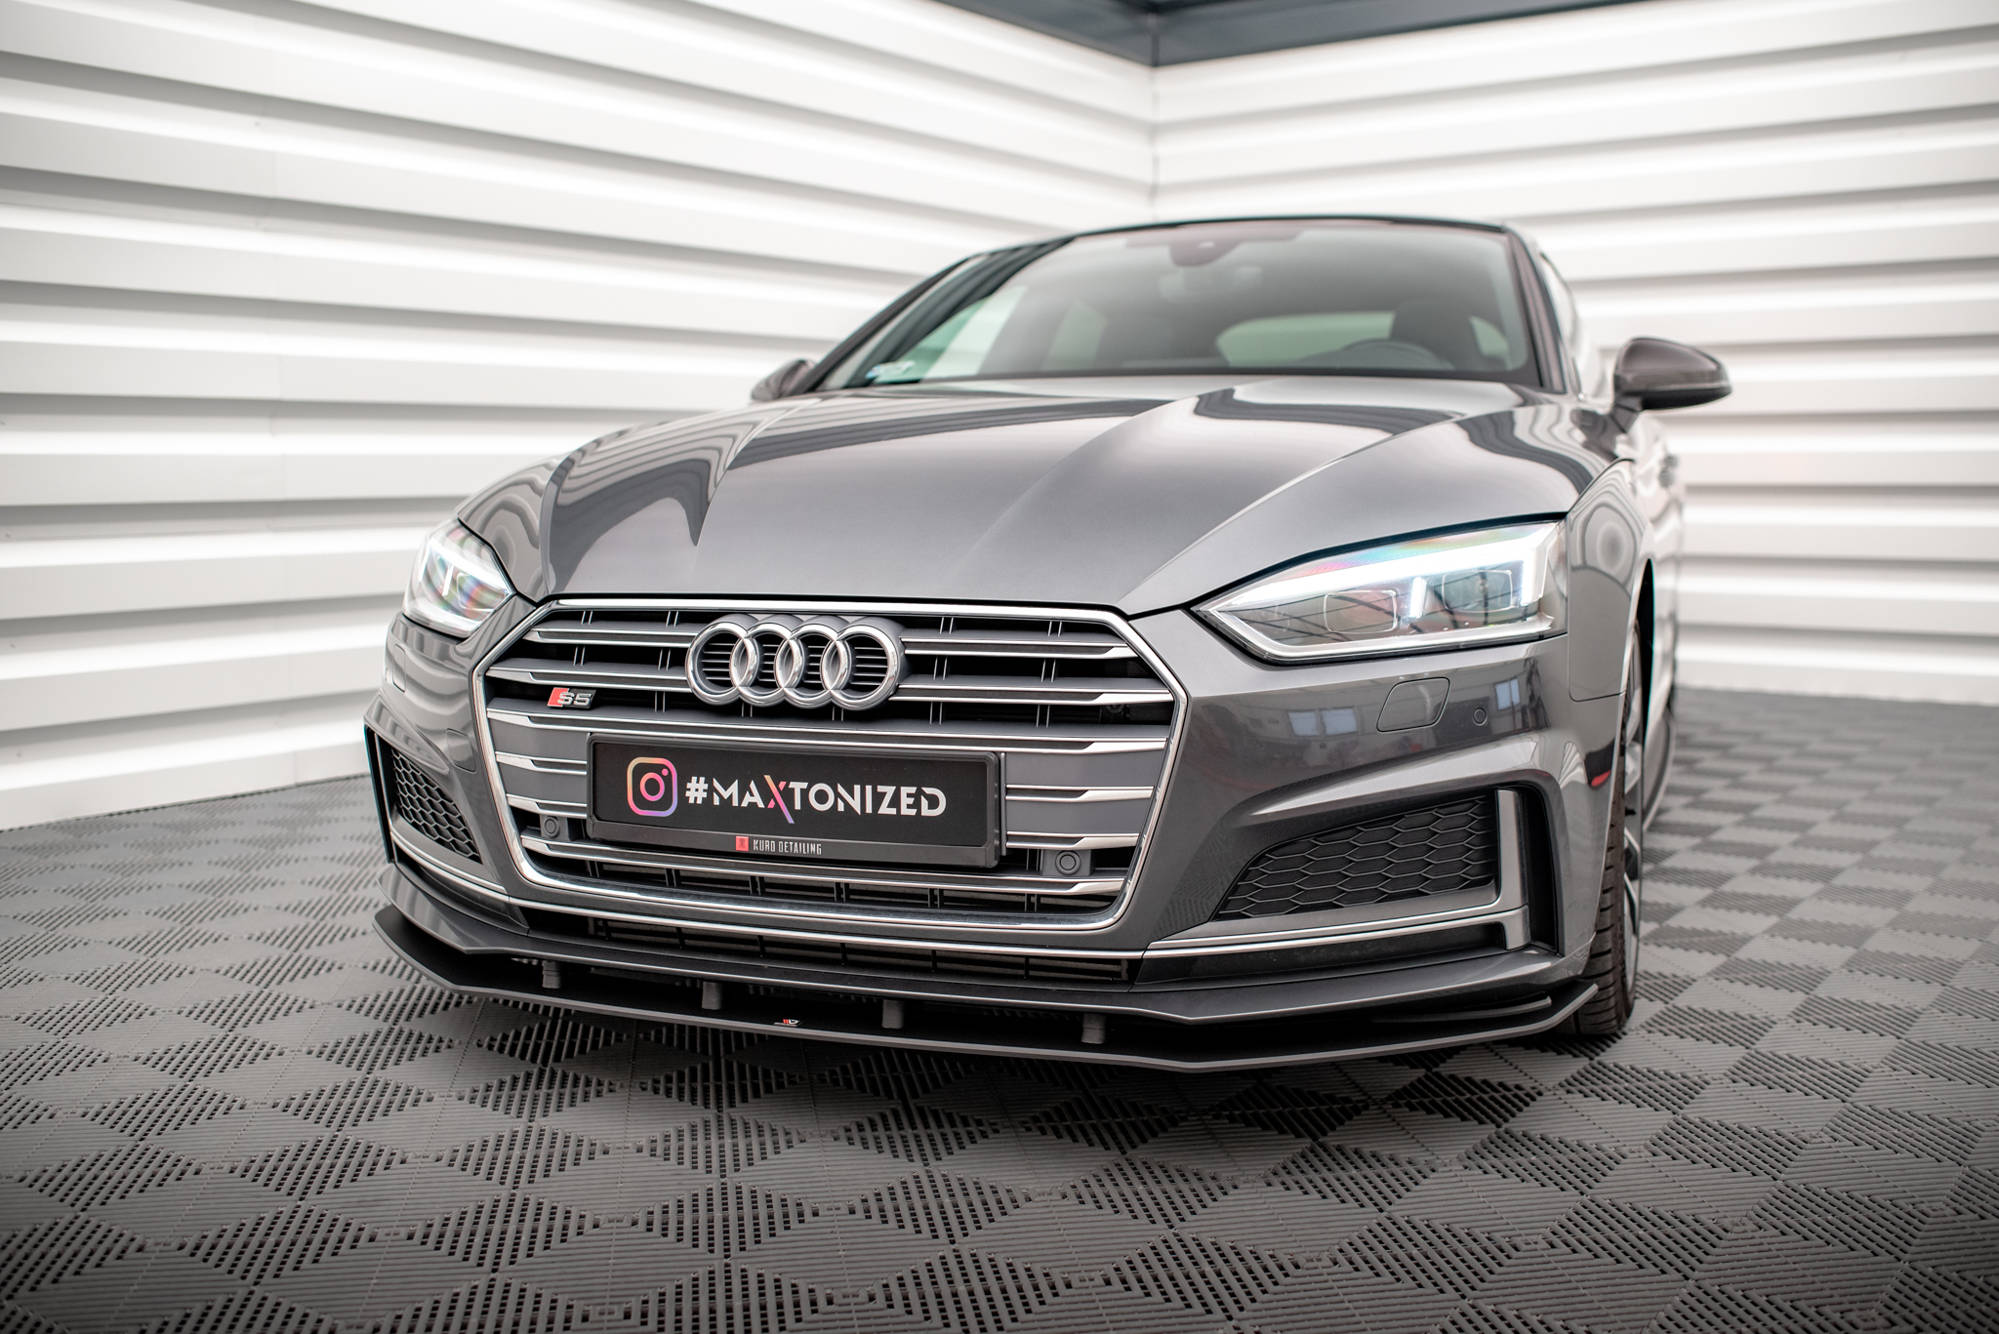 Frontleppe Street Pro Audi A5 S-Line / S5 Coupe / Sportback F5